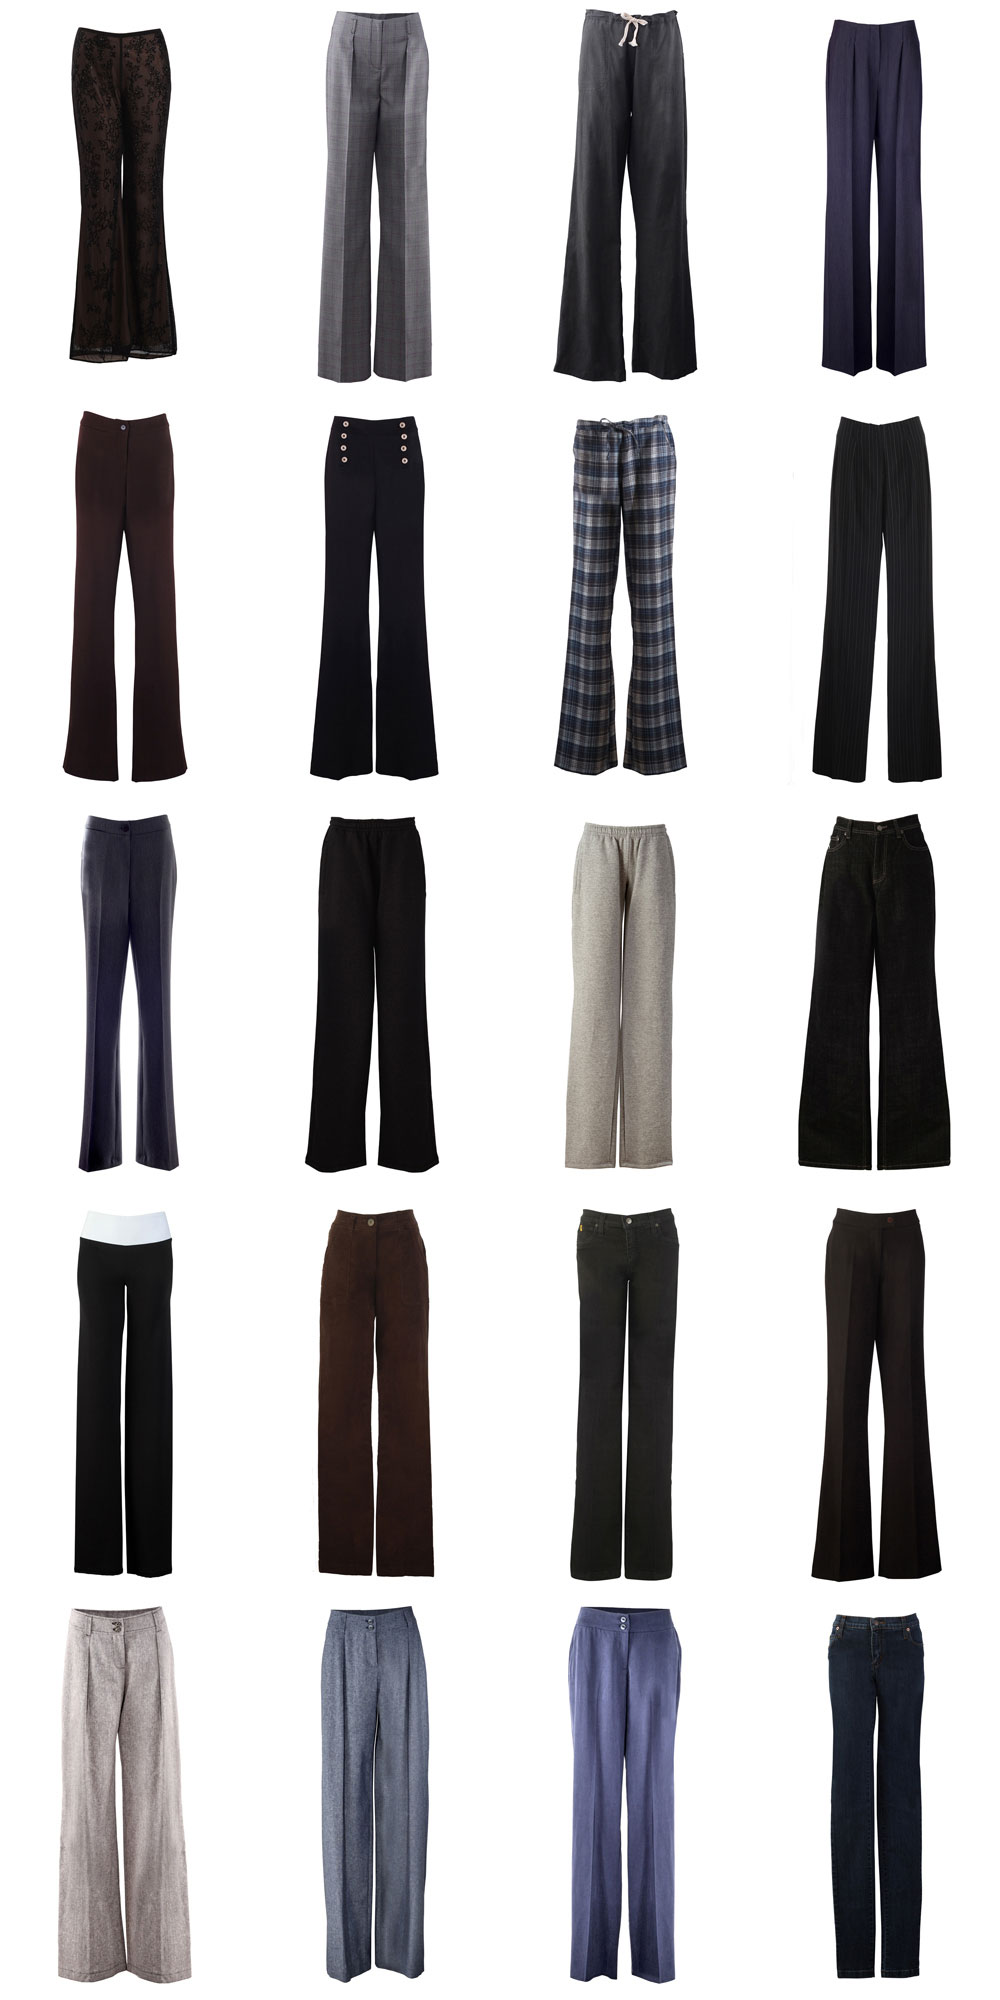 Photos of Various Trousers and Pants